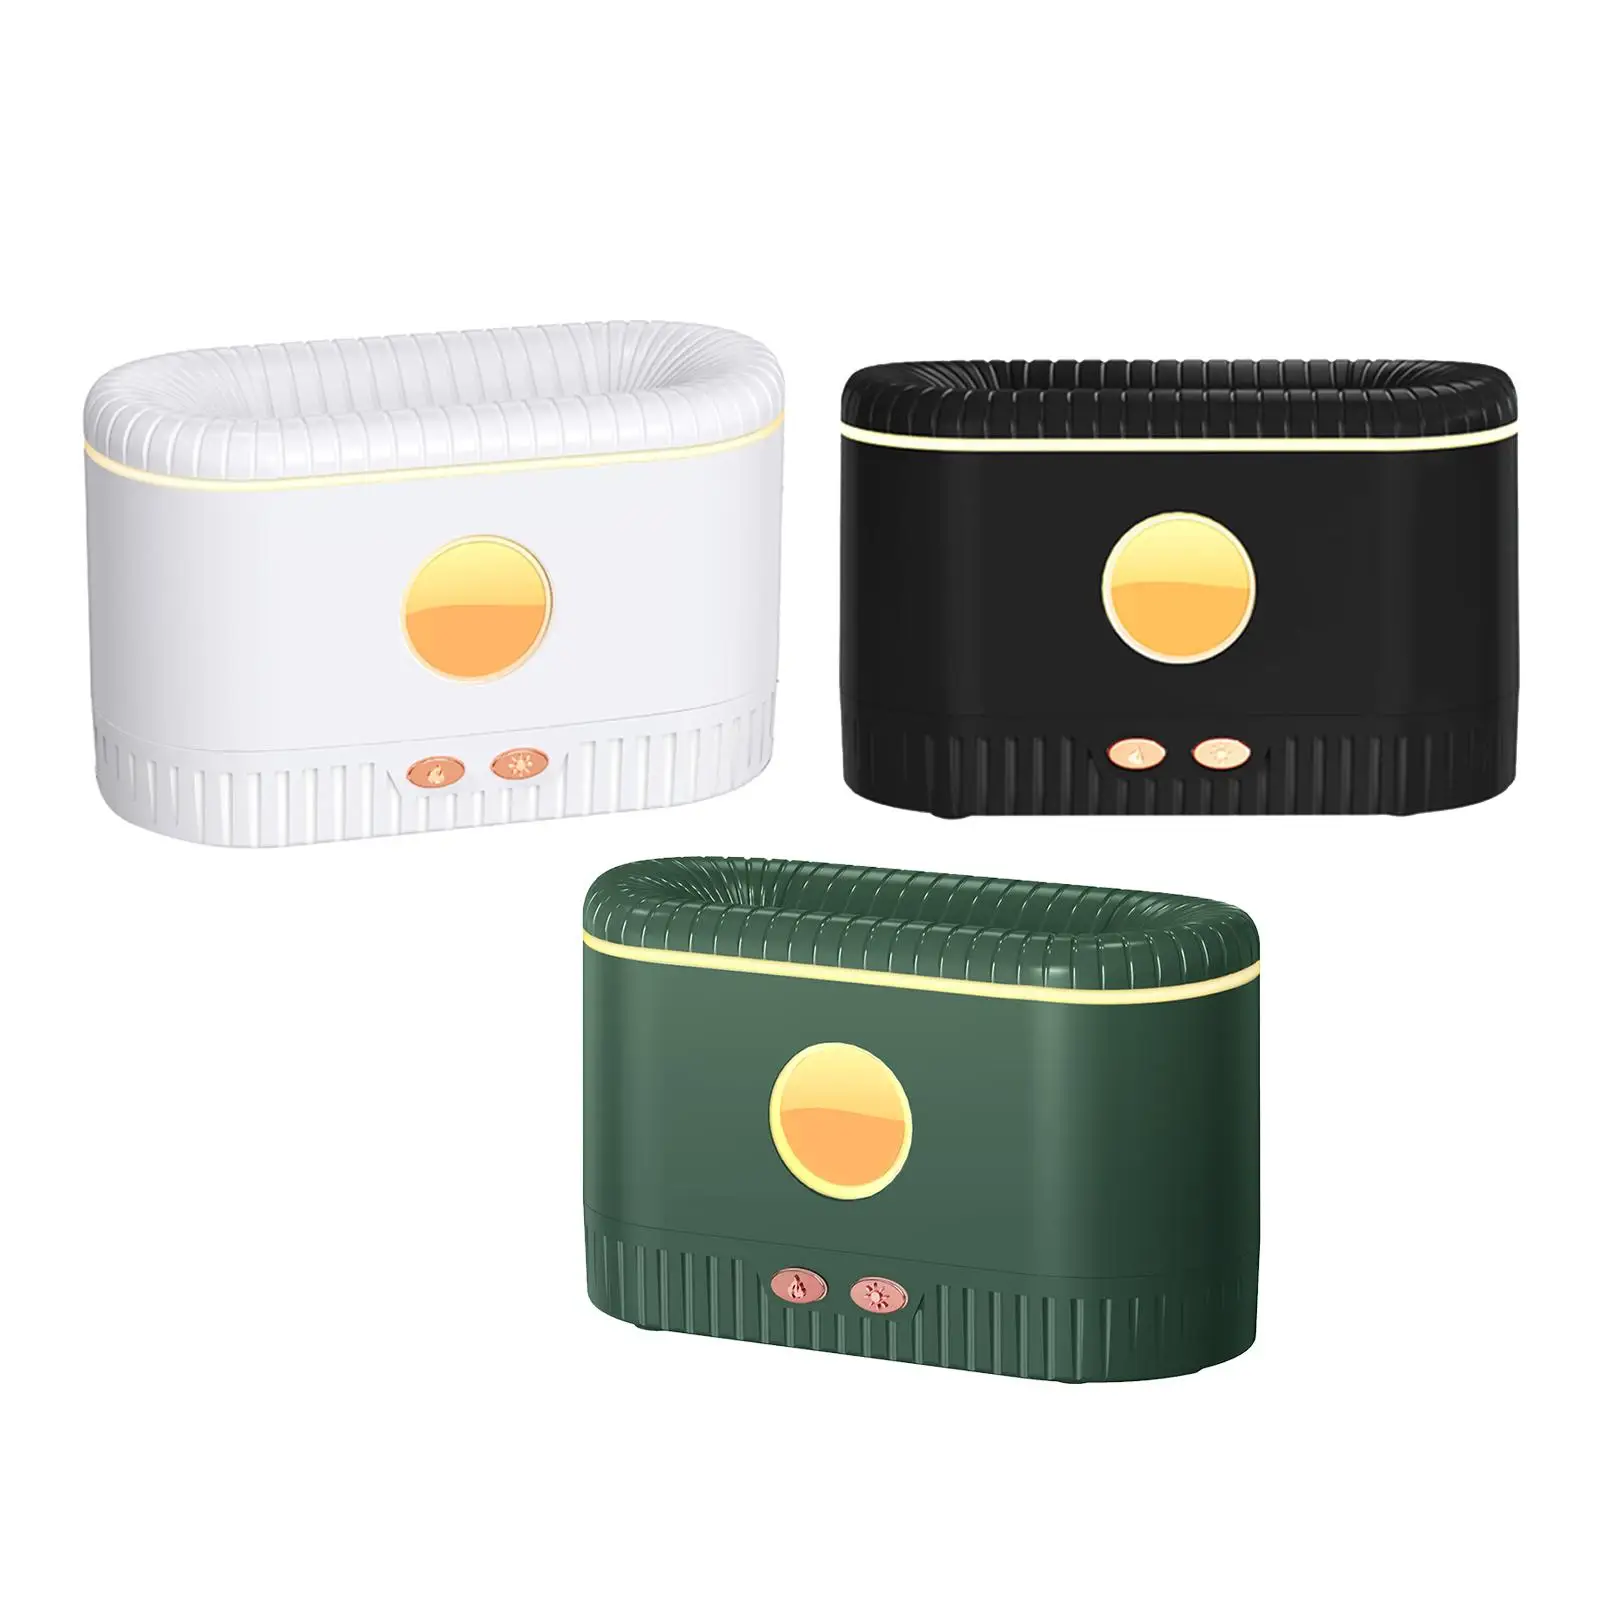 Portable Air Humidifier USB with Realistic Lamp Colors